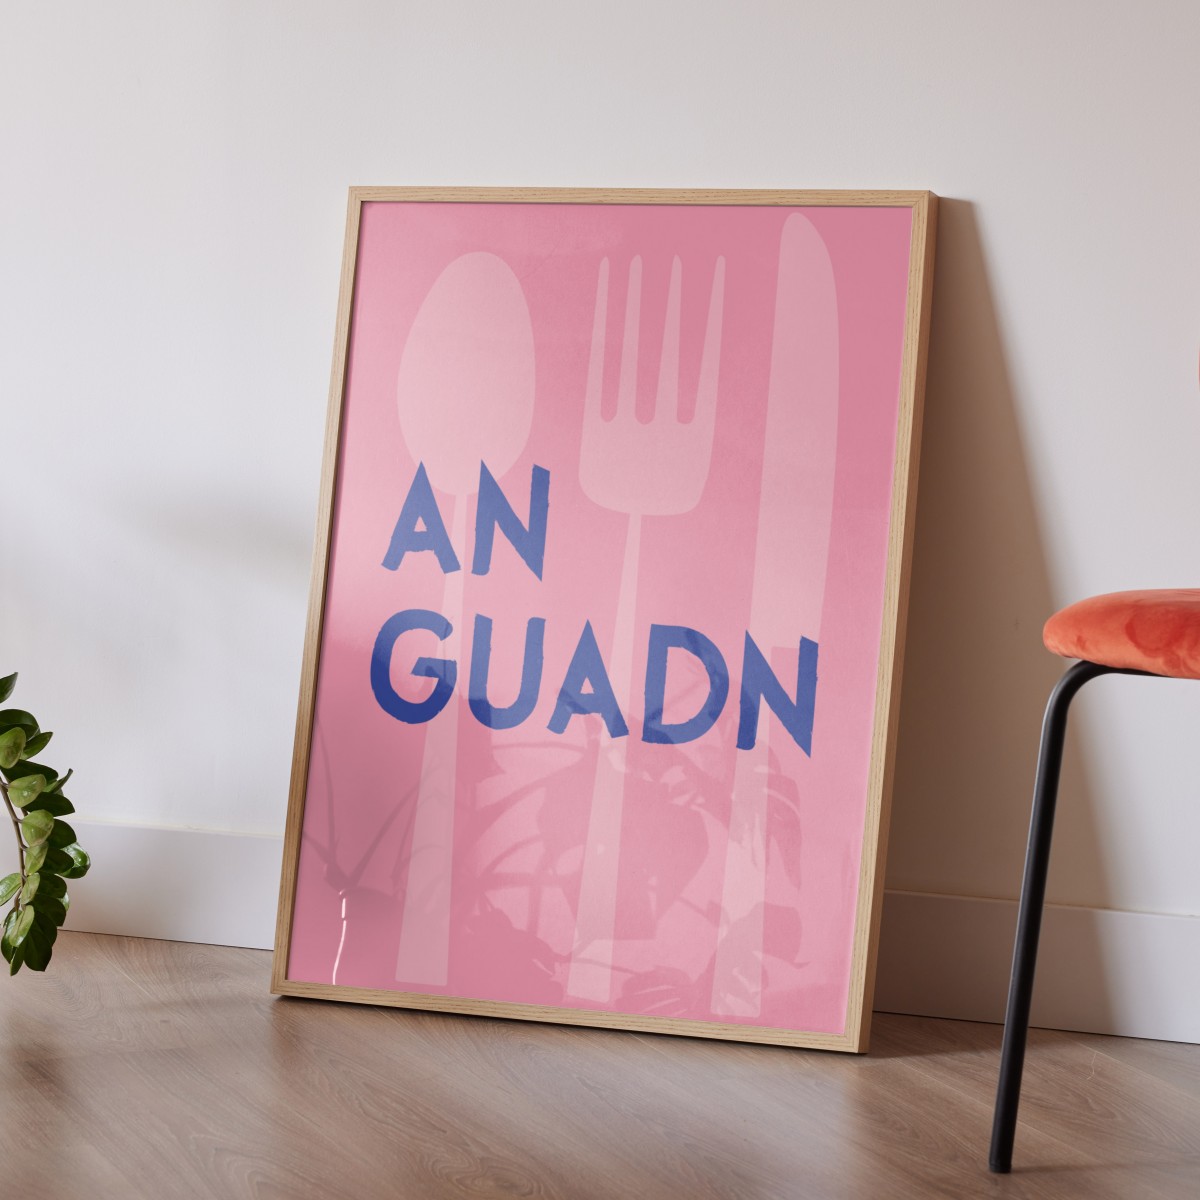 vonsusi - Poster "An Guadn"